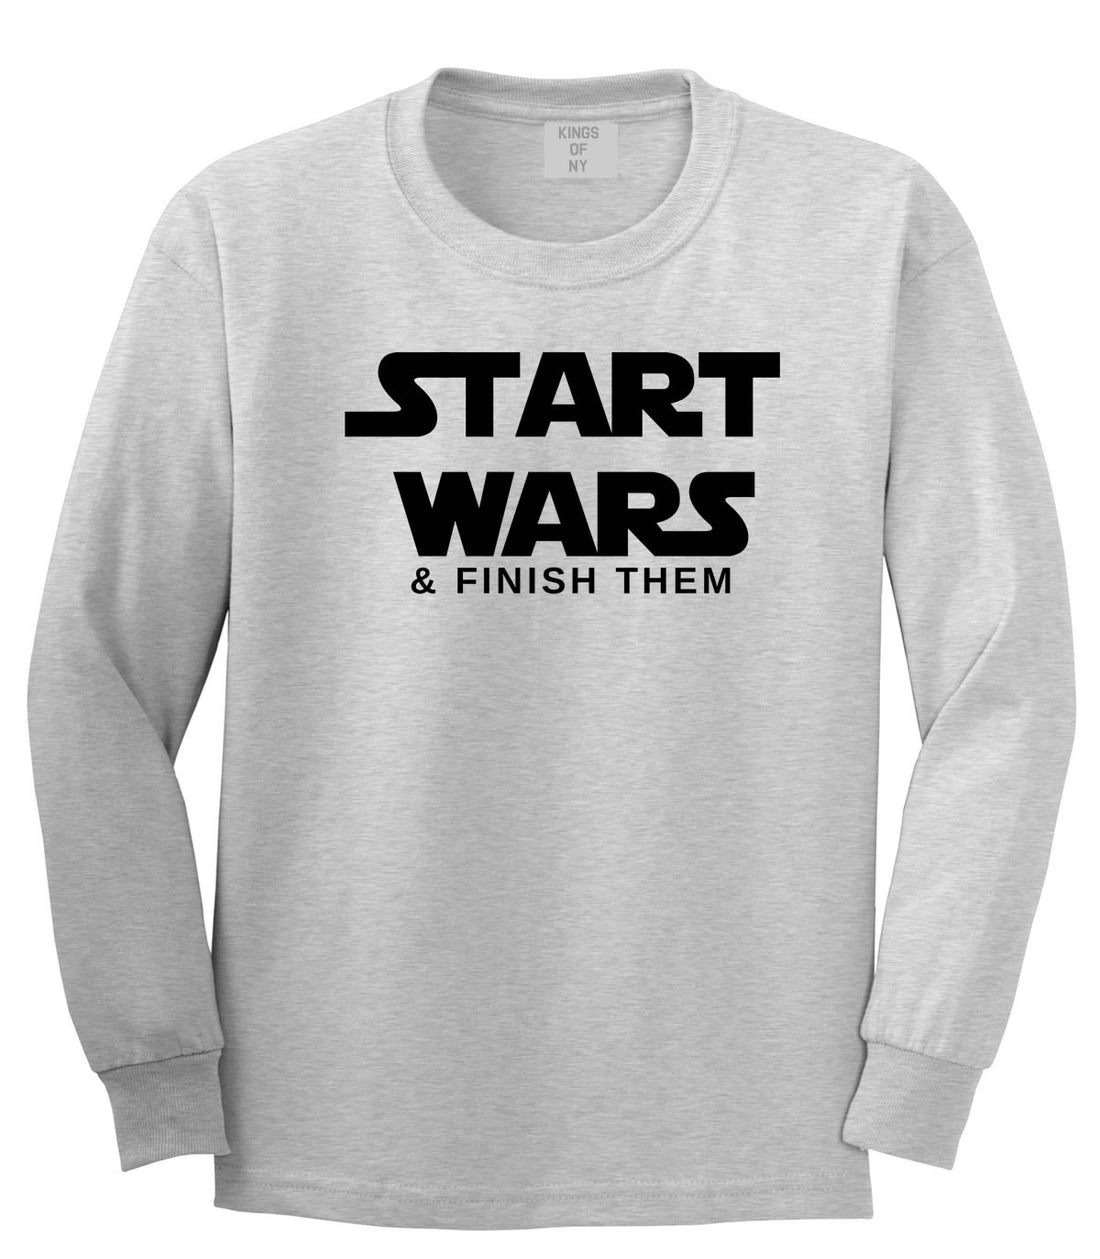 Start Wars Long Sleeve T-Shirt By Kings Of NY